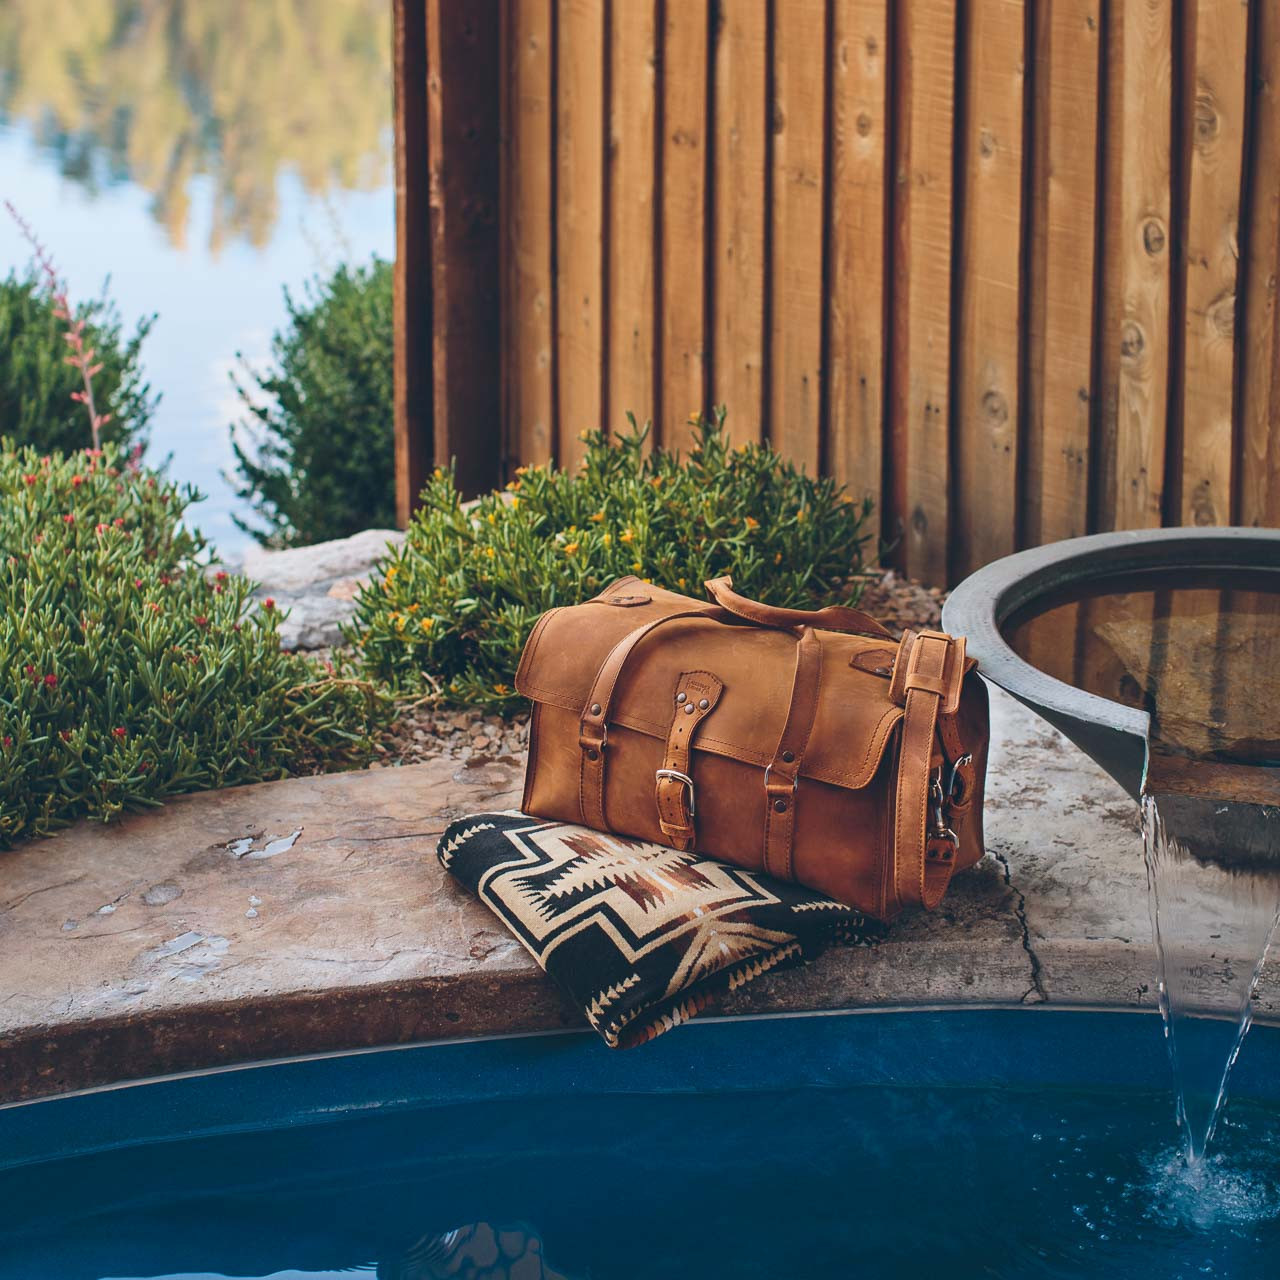 Leather Duffle Bag a.k.a. The WaterBag